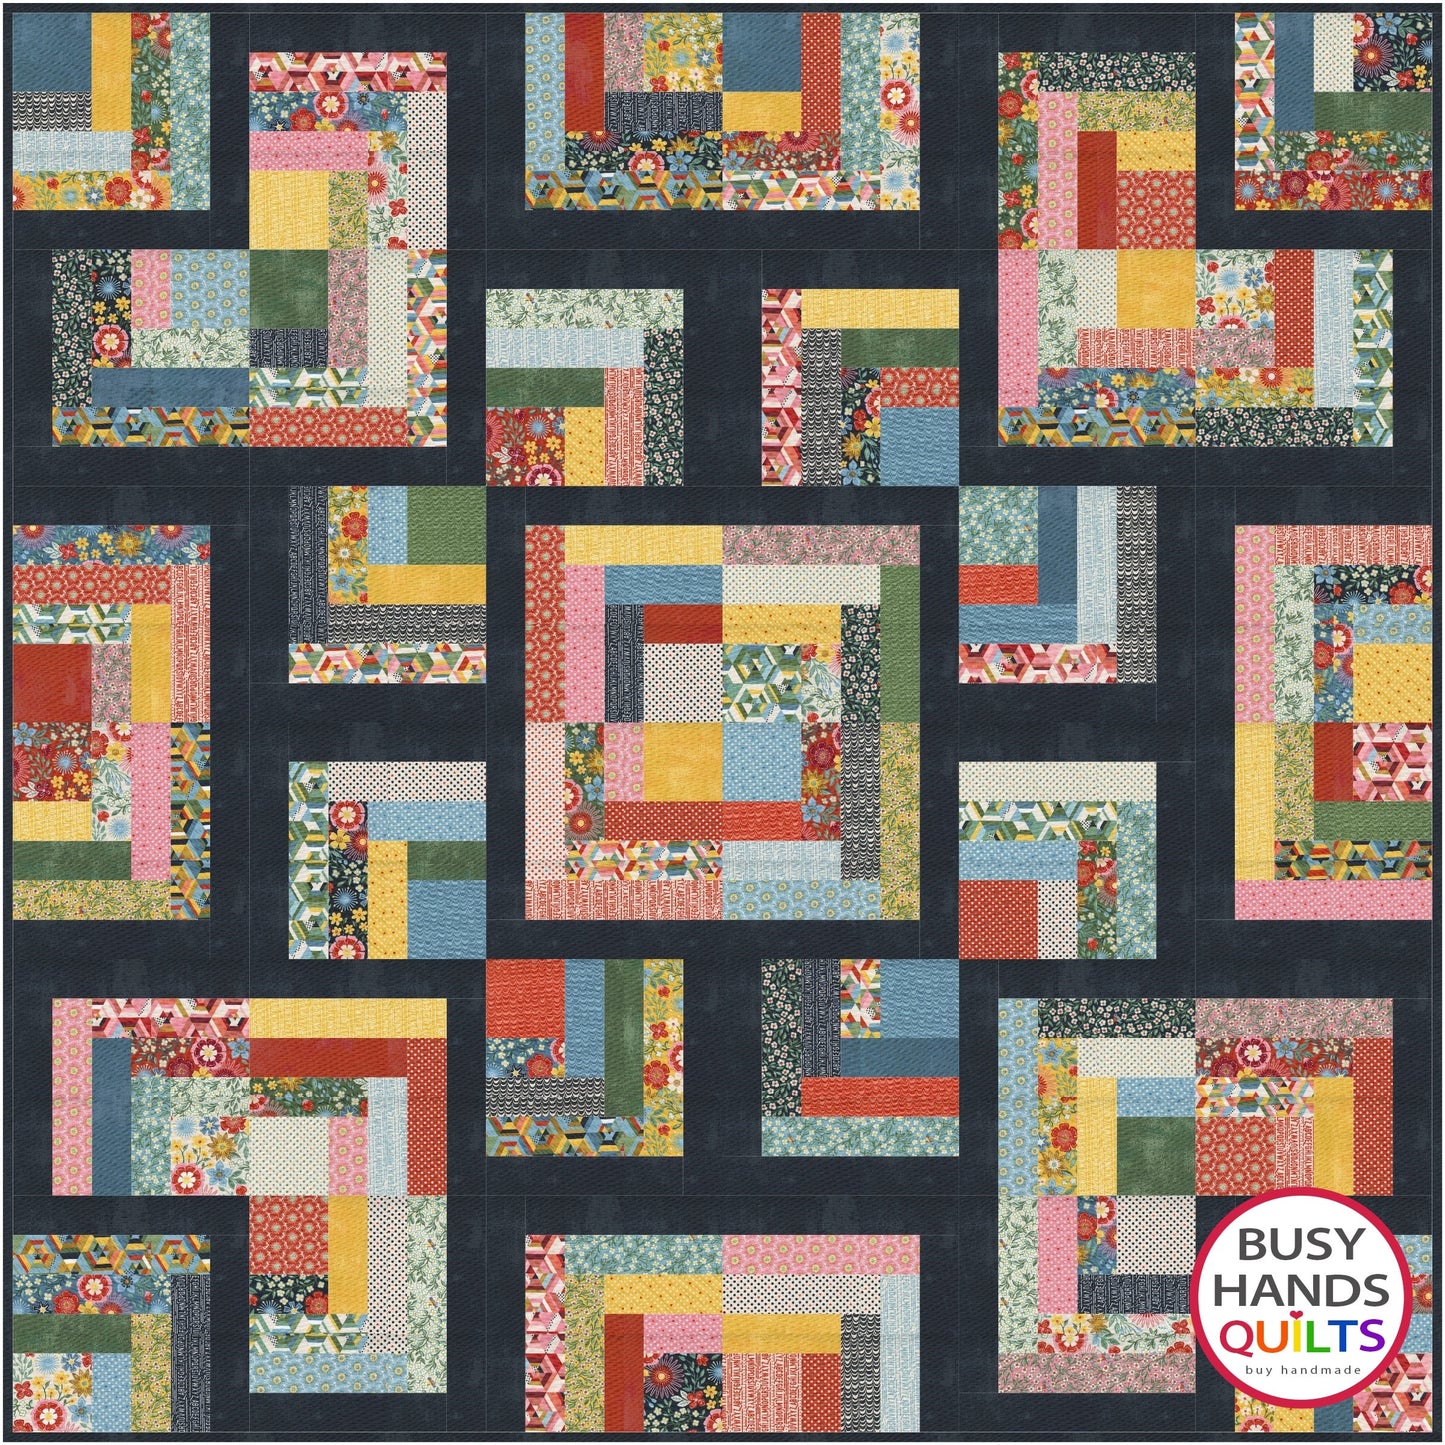 Friendship Quilt Pattern PDF DOWNLOAD Busy Hands Quilts $12.99